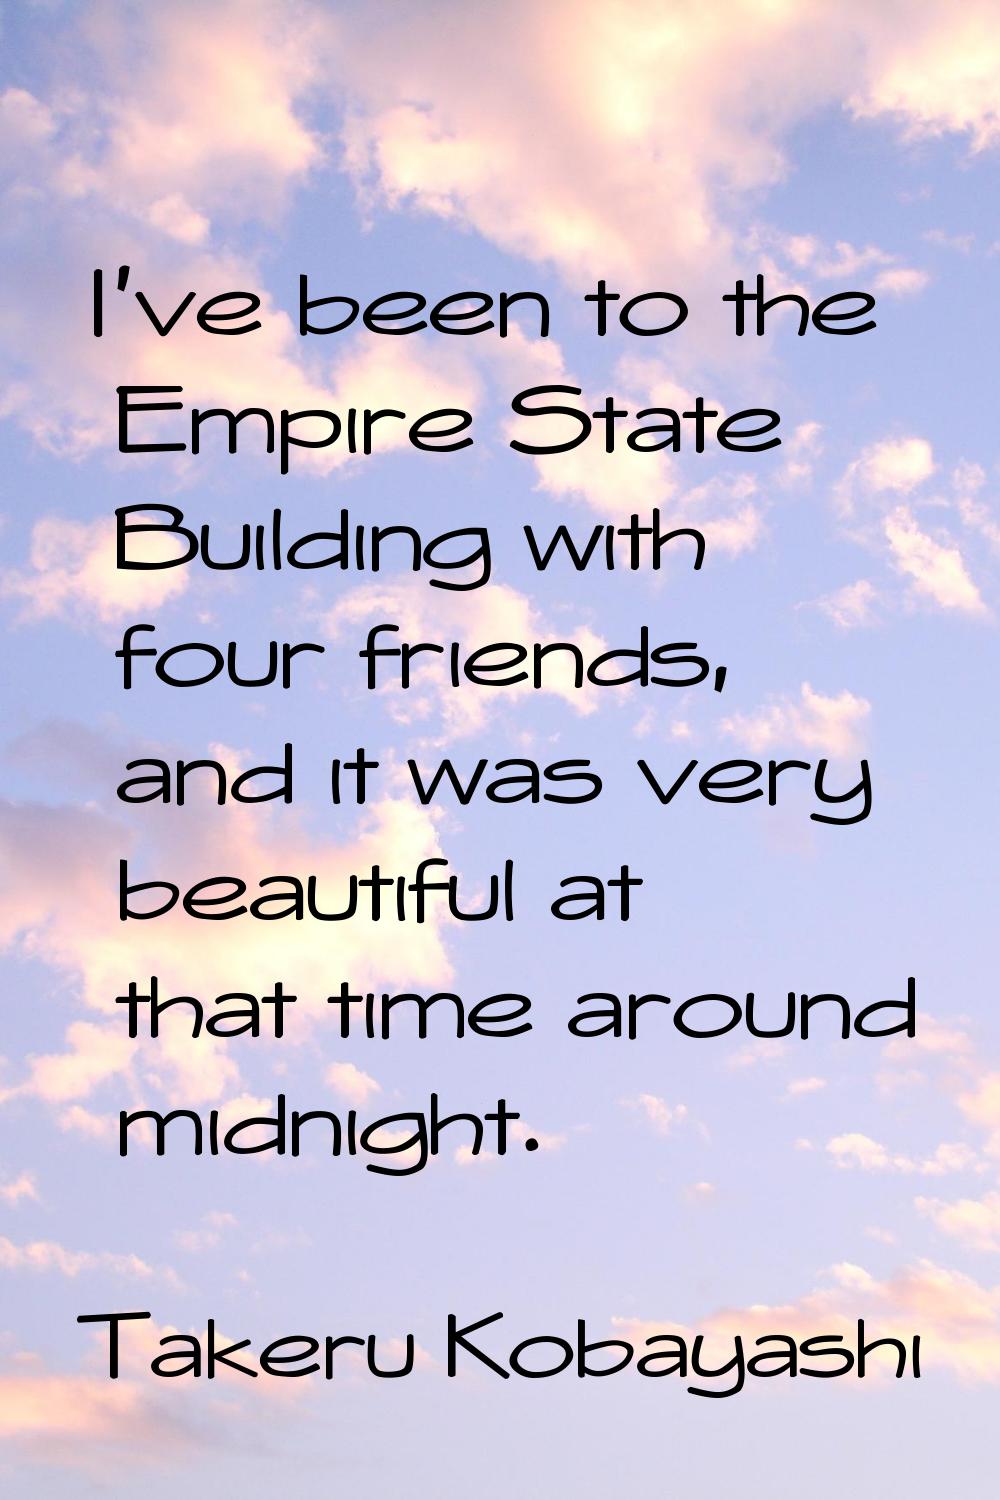 I've been to the Empire State Building with four friends, and it was very beautiful at that time ar